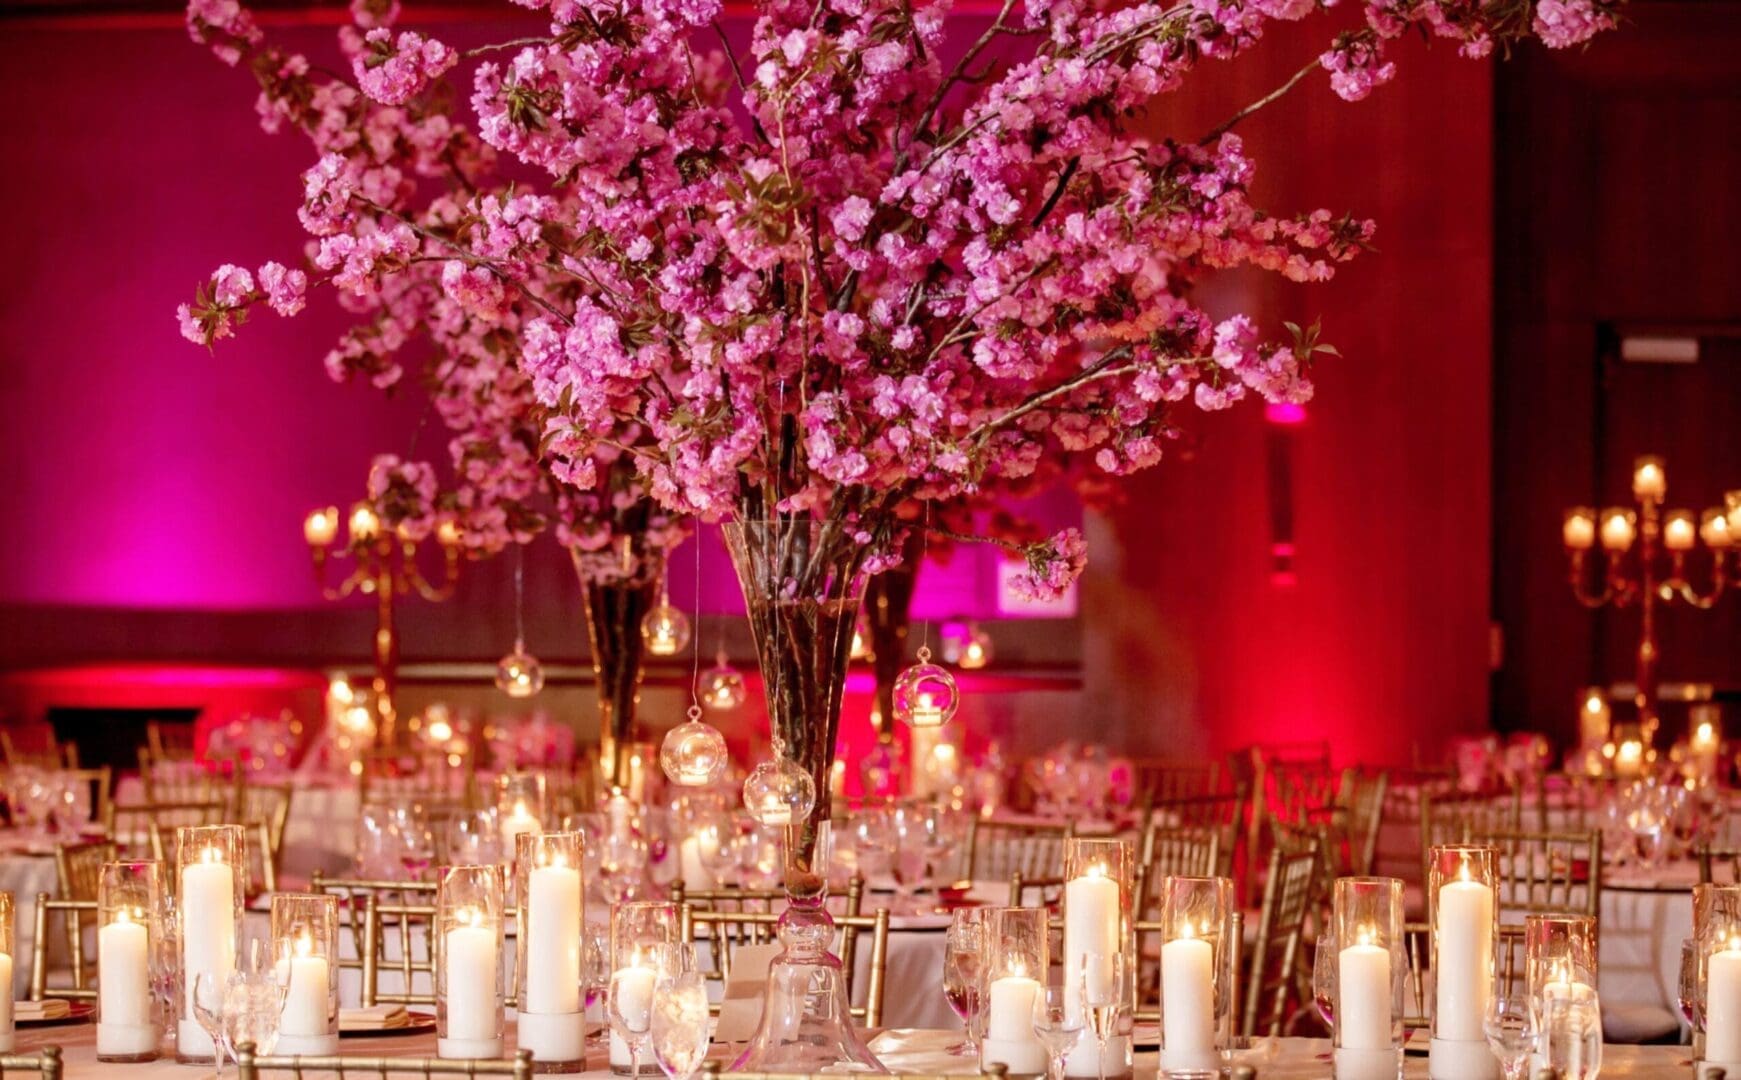 A wedding reception with pink flowers and candles, showcasing elegant wedding tablescape ideas.